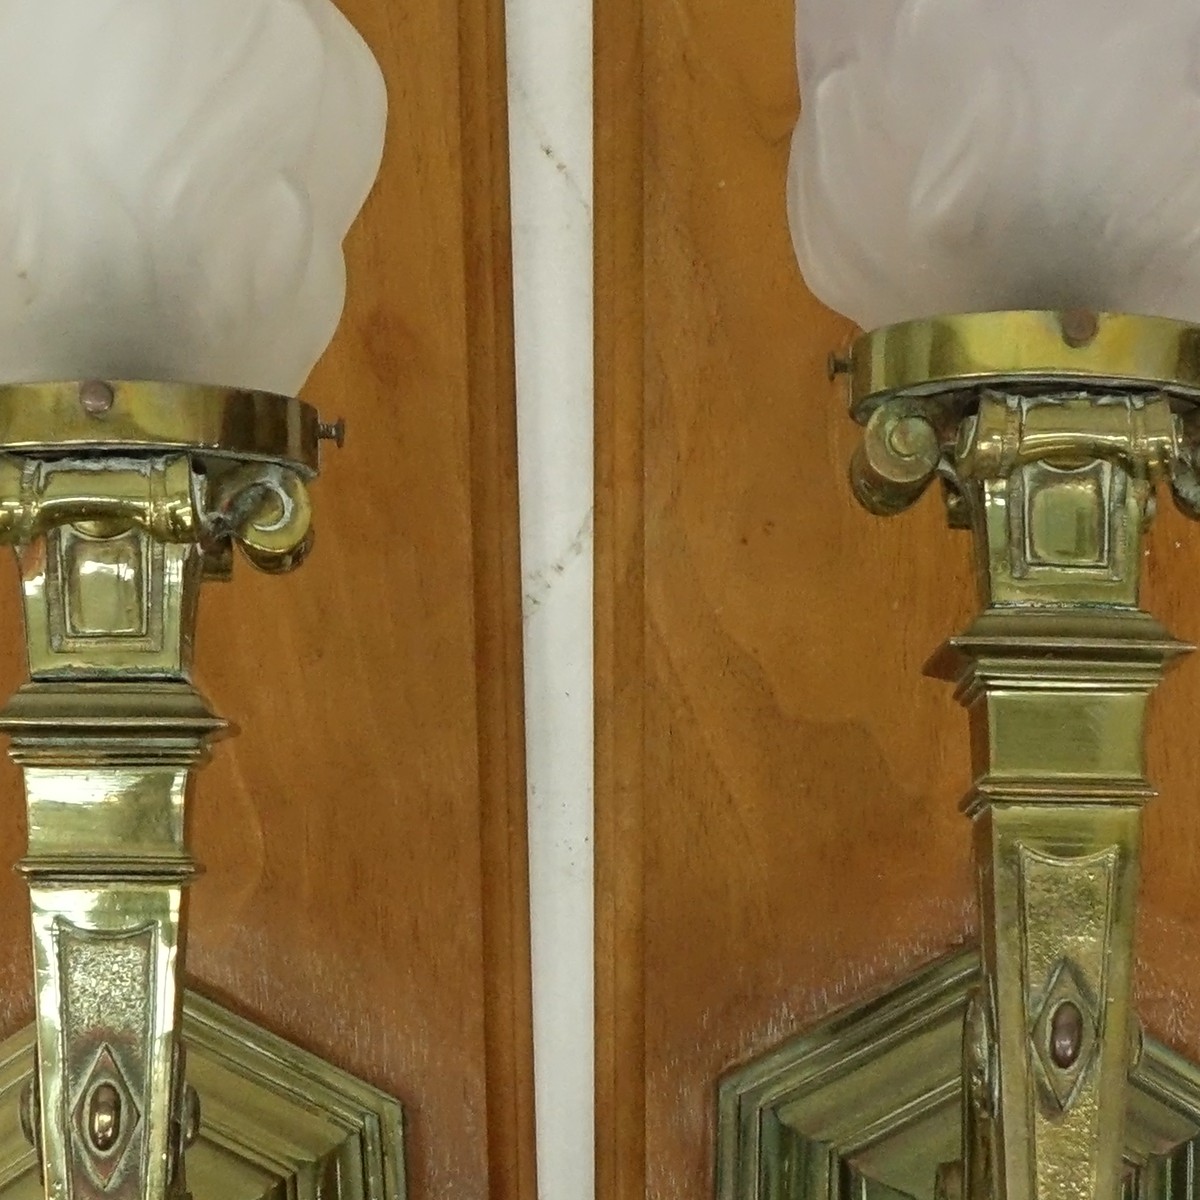 Pair of Bronze Wall Sconces with Frosted Glass Shade, Mounted on Wood Backi